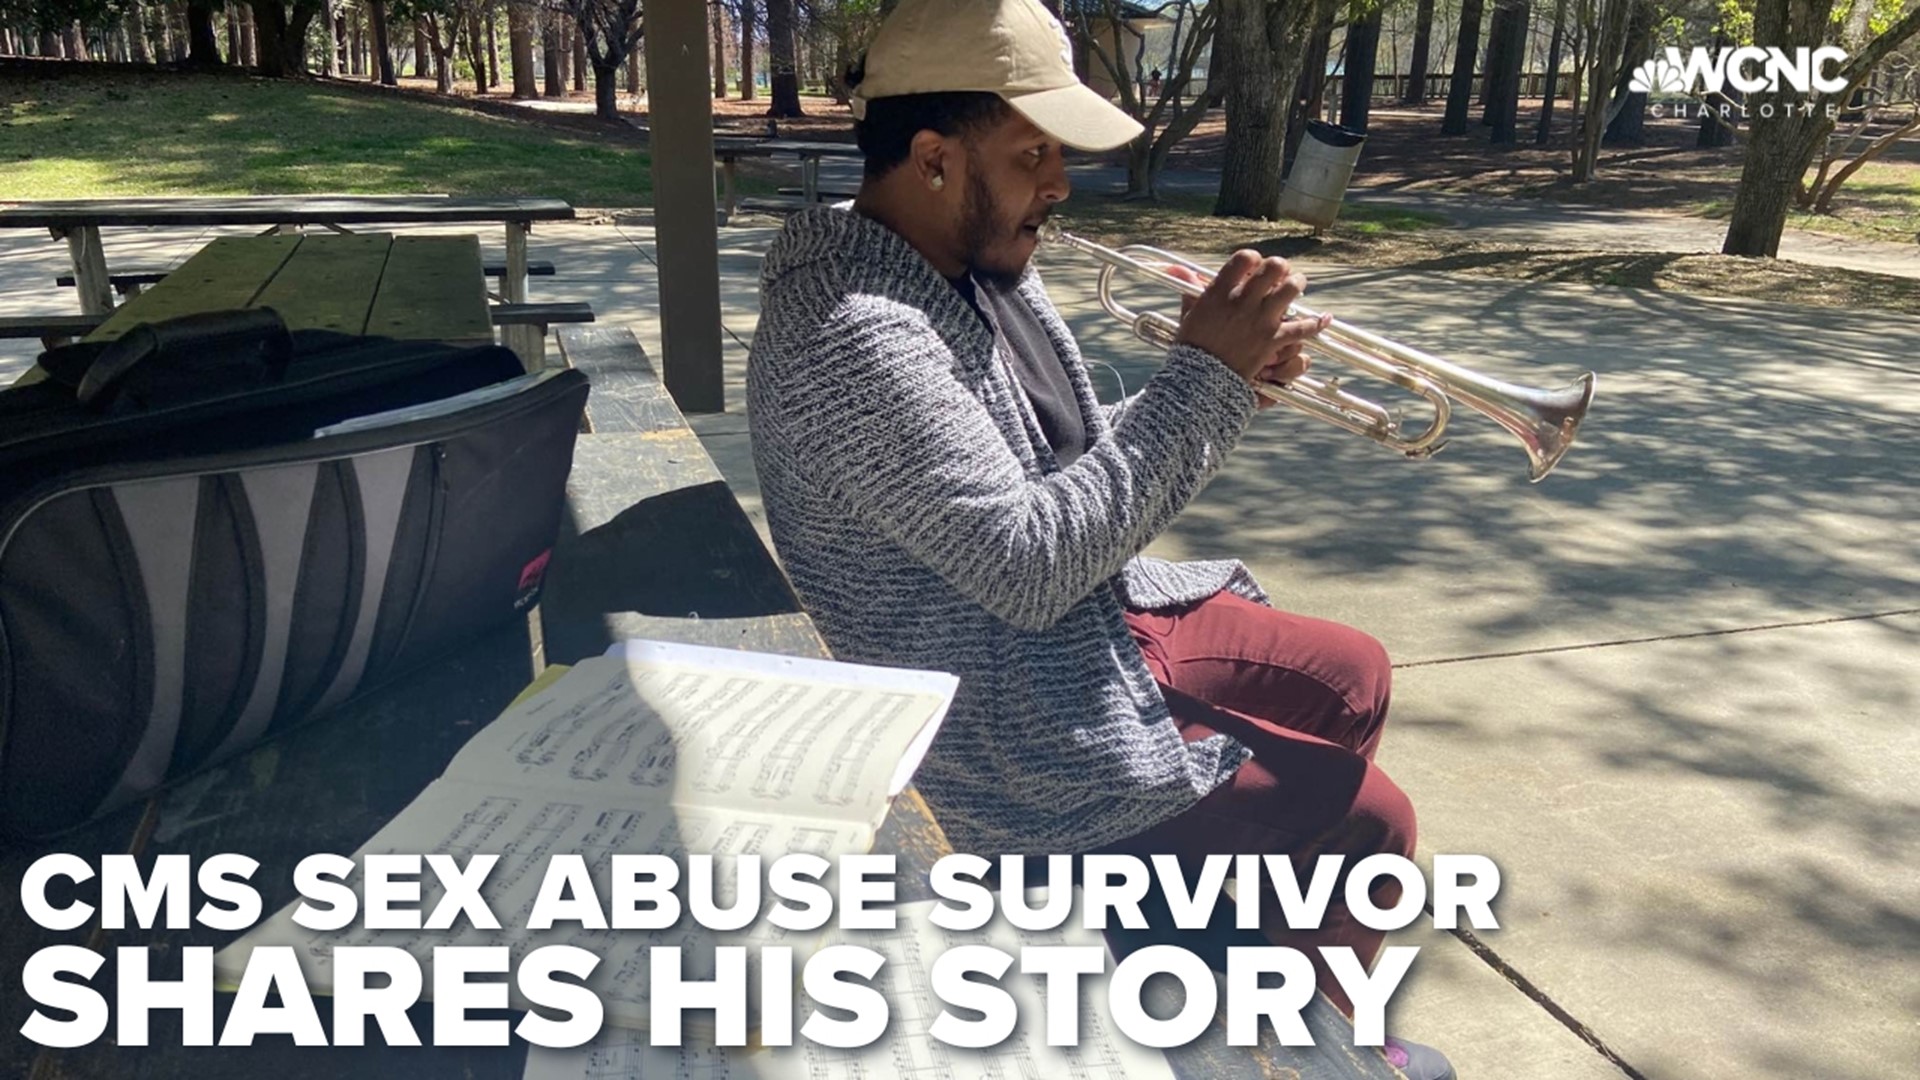 Shamarria Morrison learns how a student who was abused by a teacher is healing a decade later.